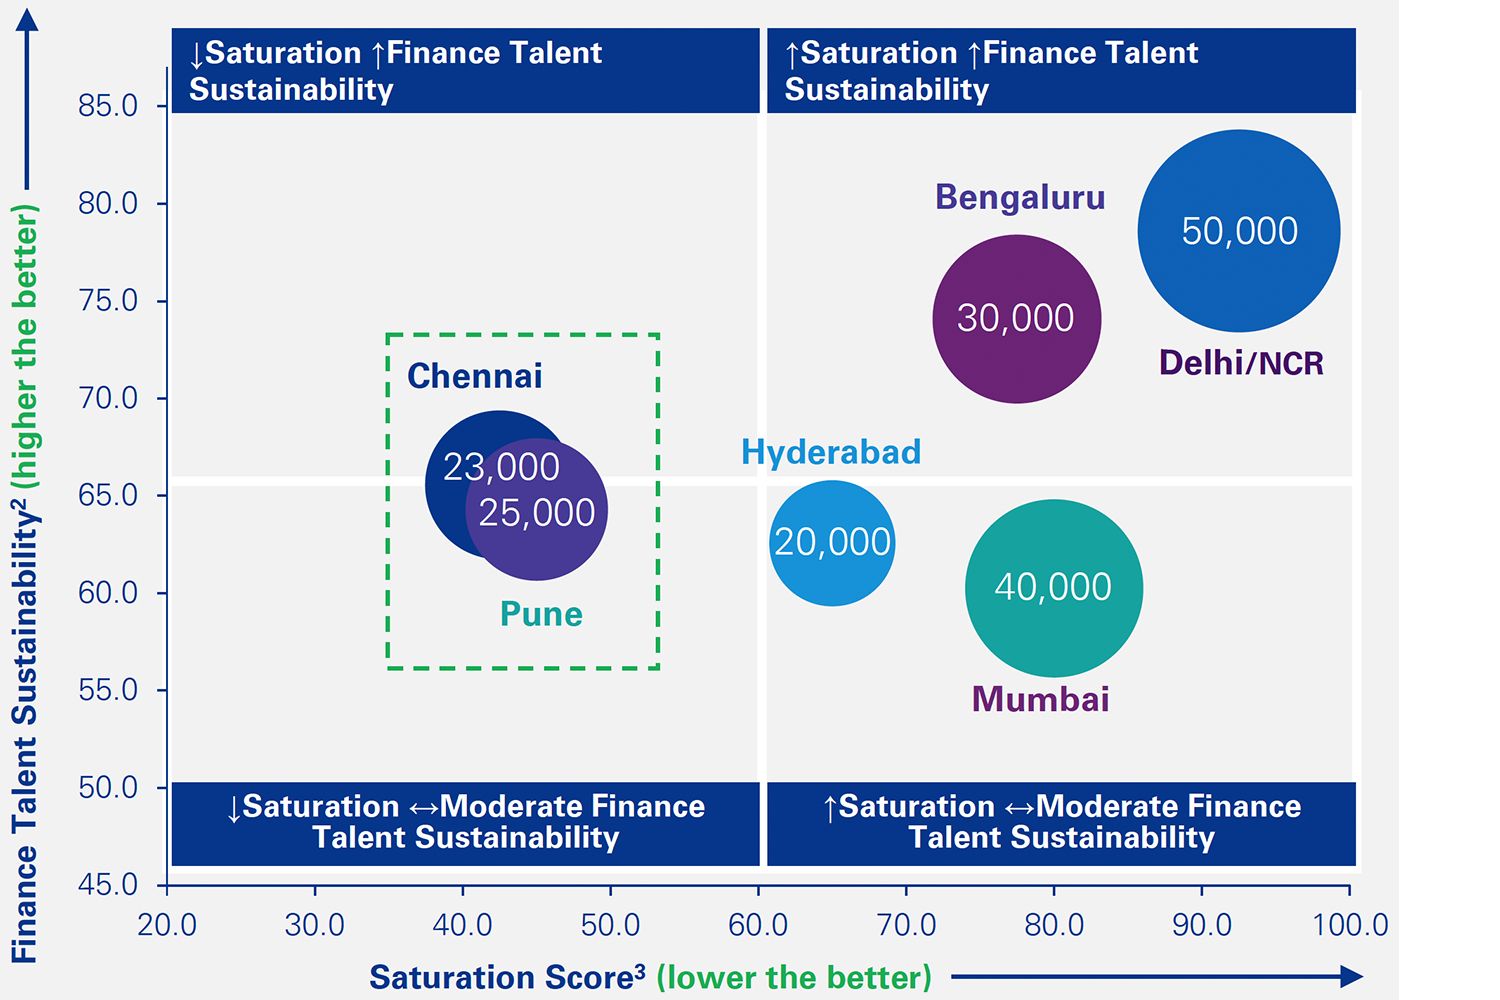 Finance talent sustainability index versus level of saturation